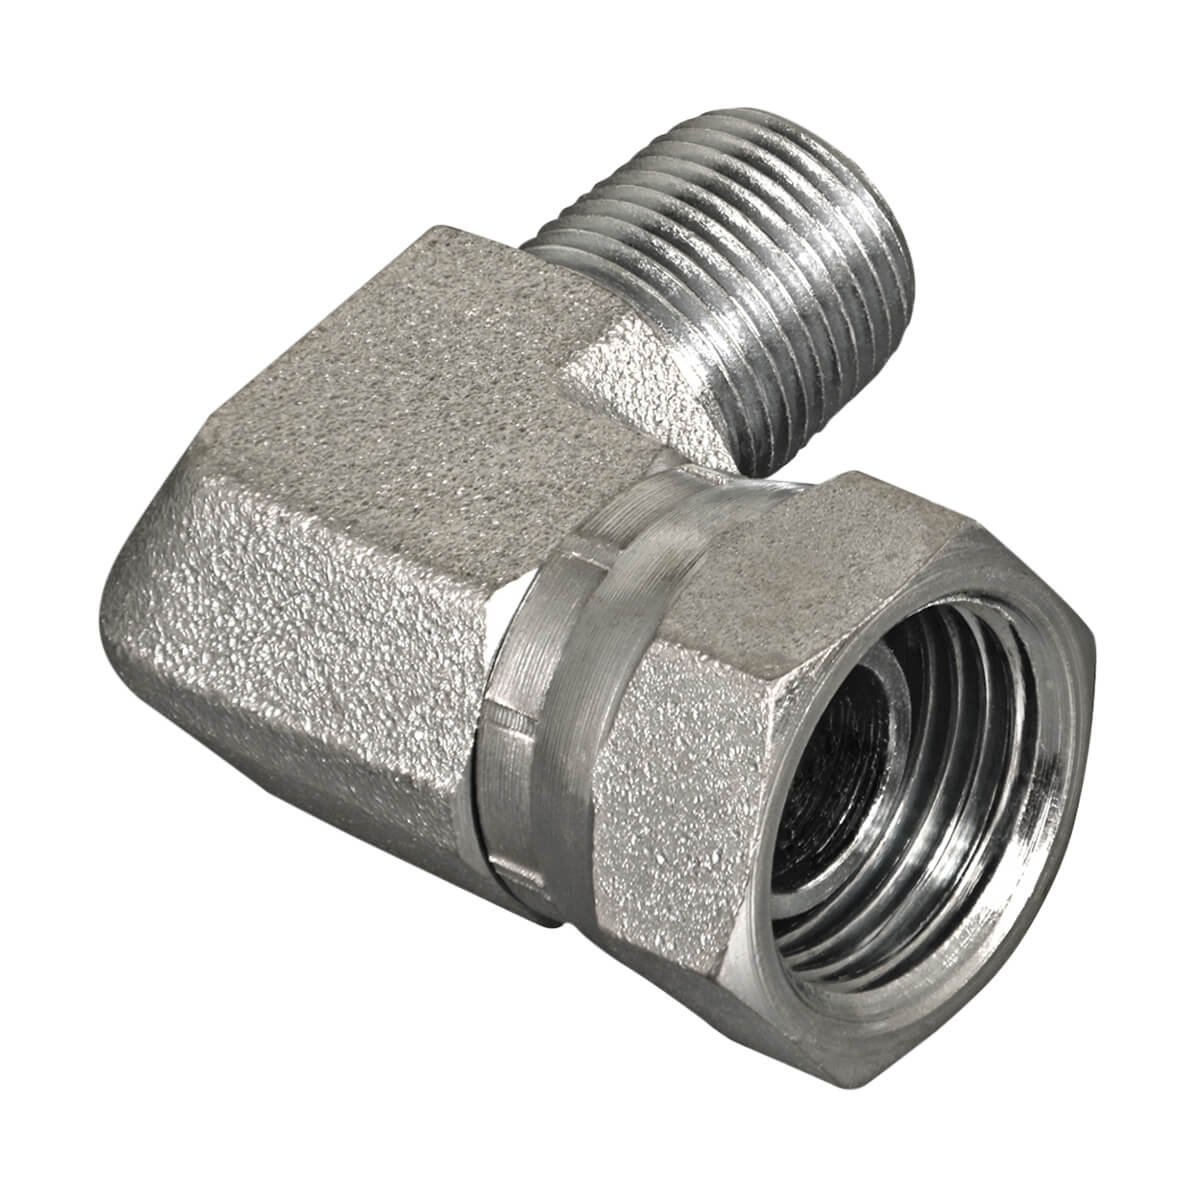 Swivel Hydraulic Adapter - 3/8-in MPT x 3/8-in FPT 90 Degree